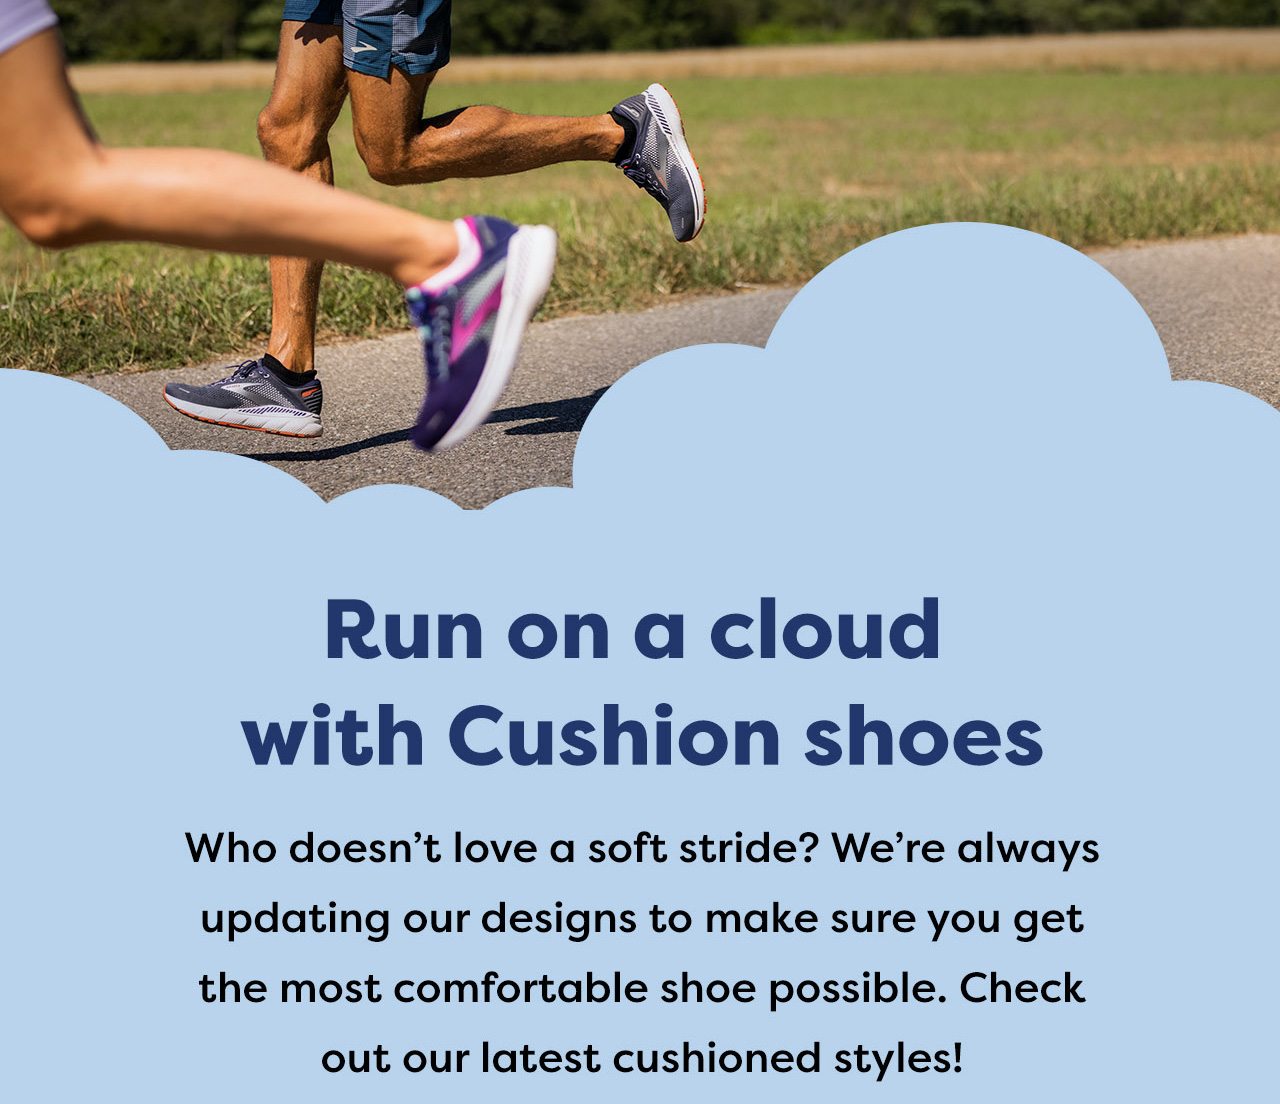 Run on a cloud with Cushion shoes - Who doesn't love a soft stride? We're always updating our designs to make sure you get the most comfortable shoe possible. Check out our latest cushionsed styles!